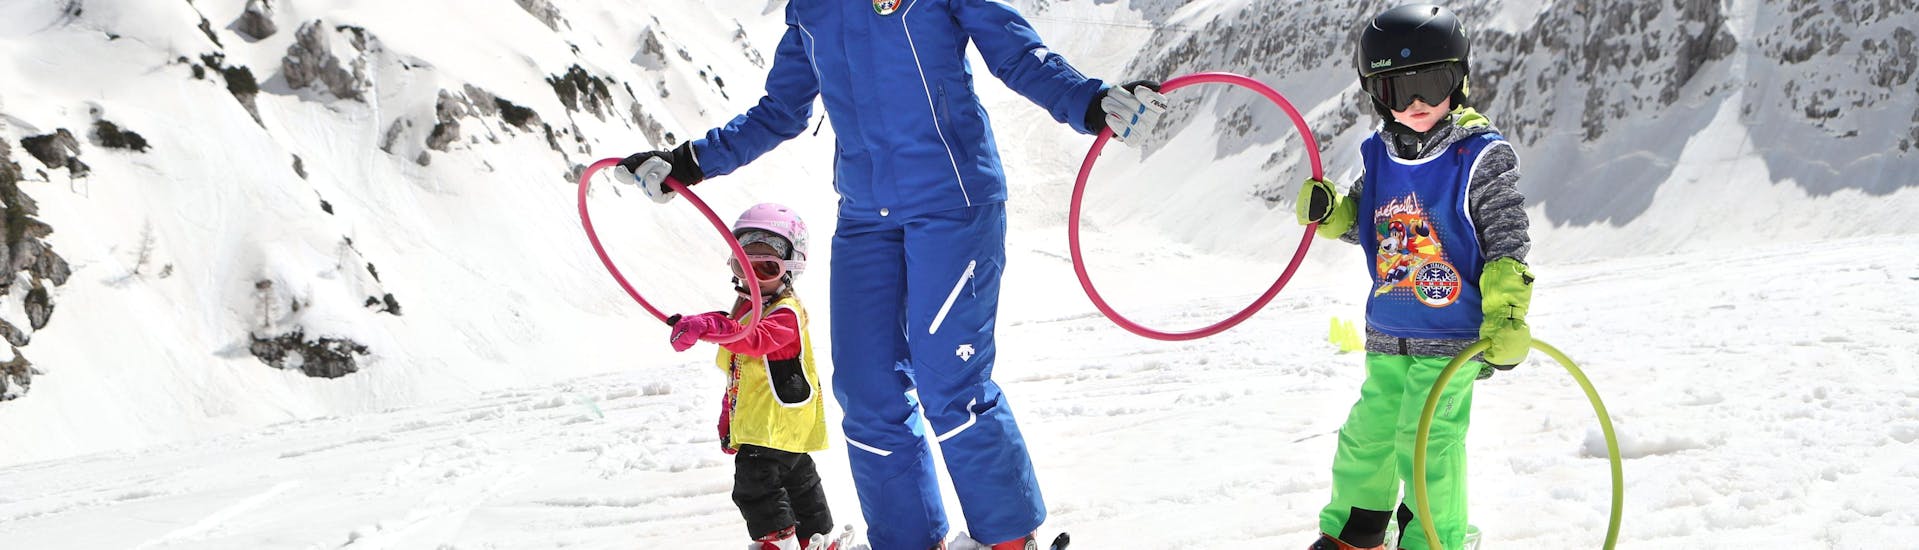 Ski Lessons "Max 6" for Kids (4-14 years) - Full Day.